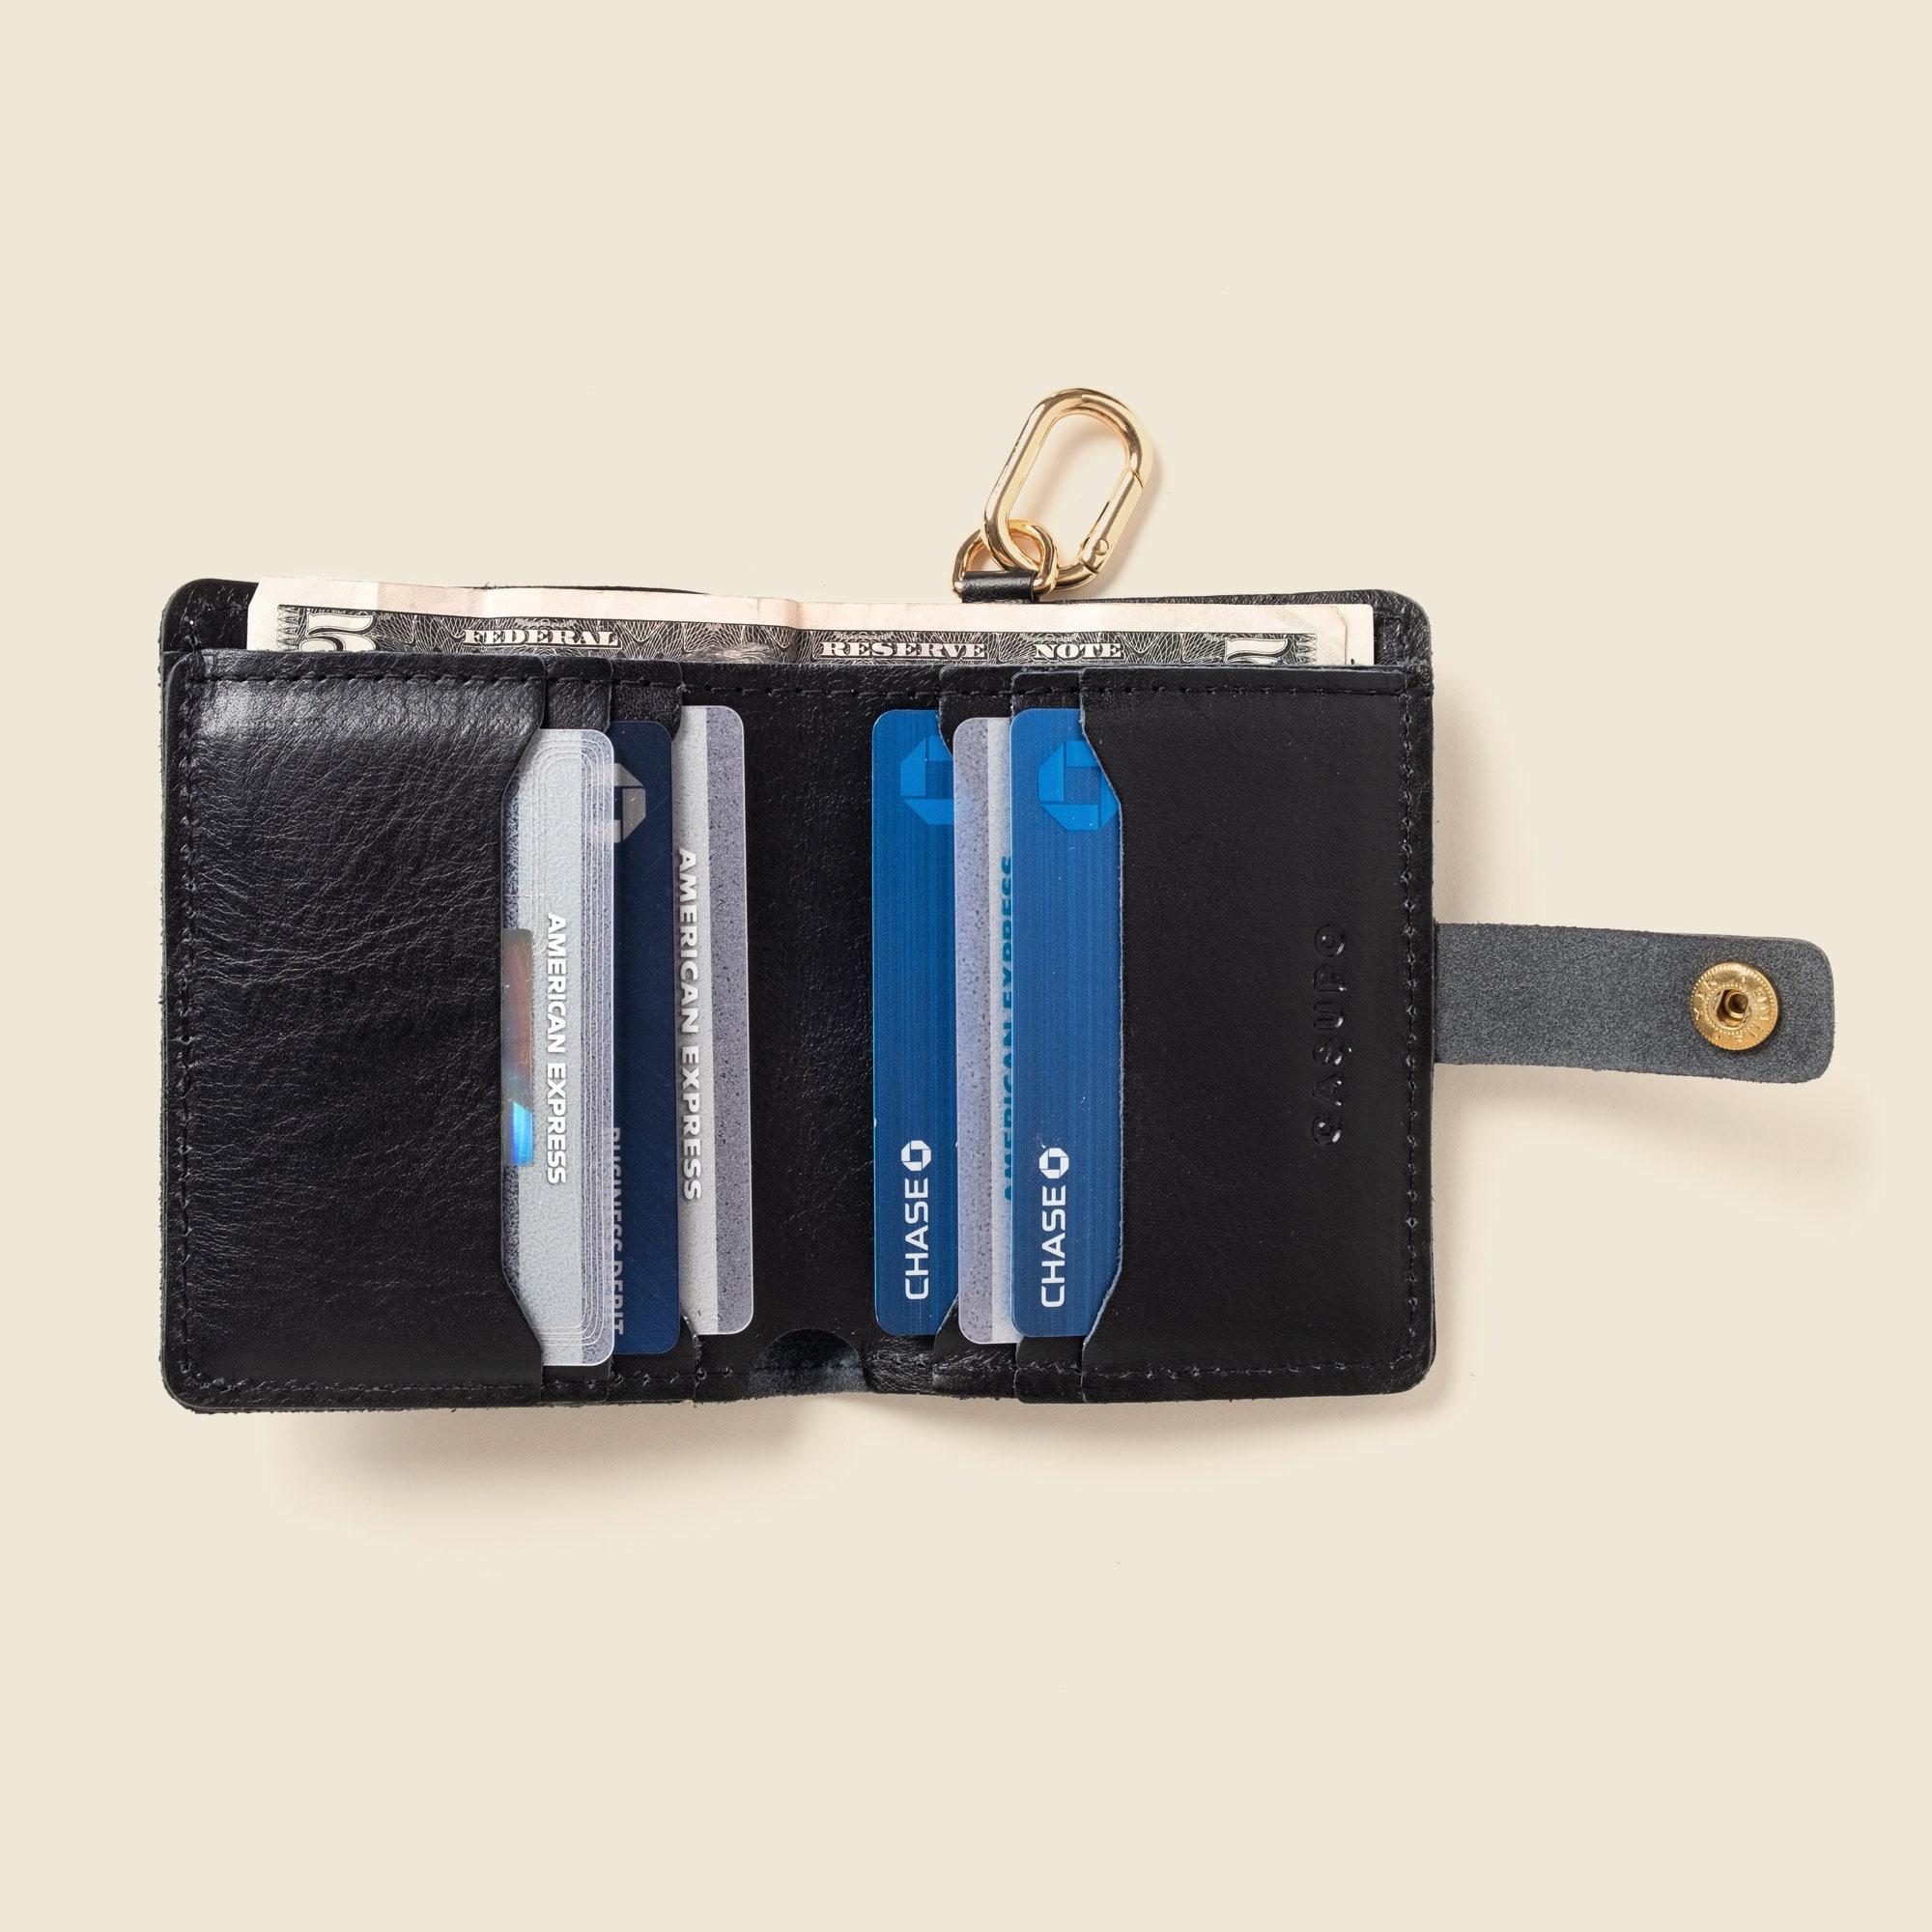 Clothing & Accessories :: Bags & Purses :: Wallets & Money Clips